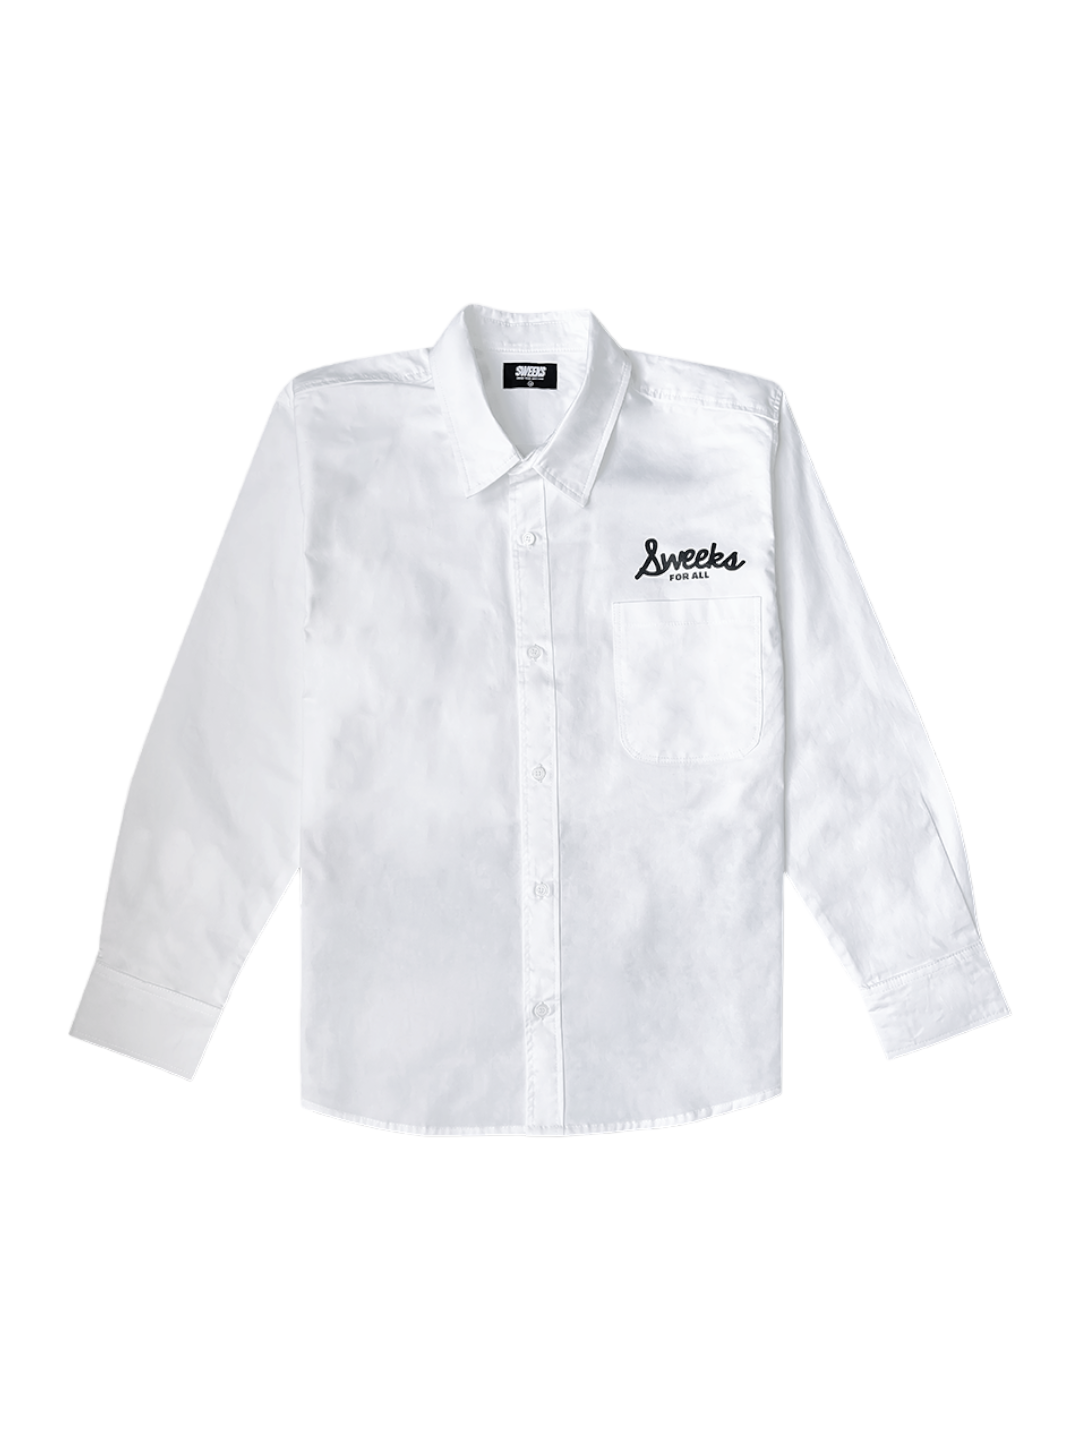 SW Layer Side L/S Shirt (White)